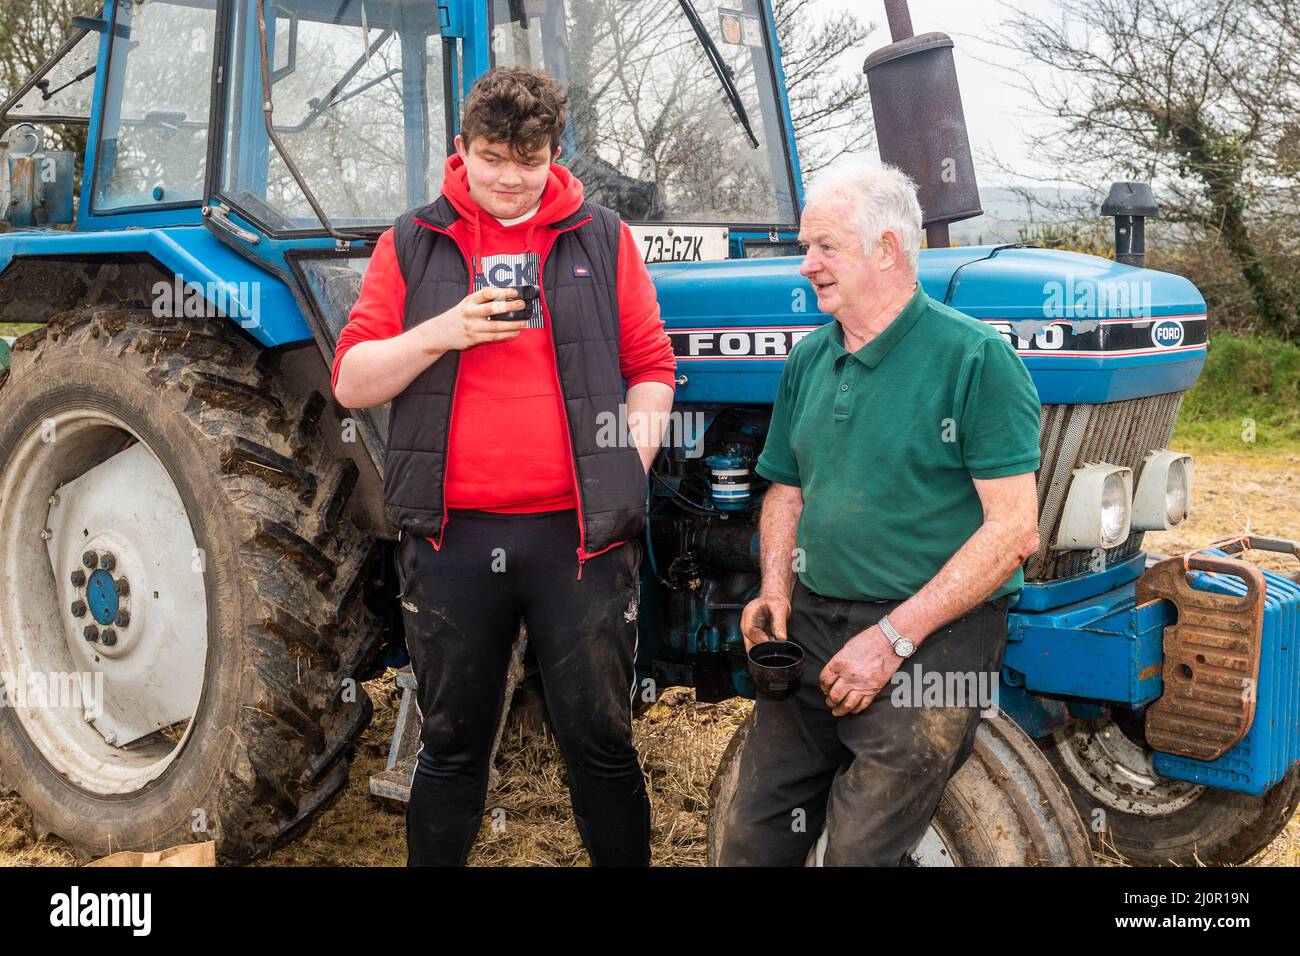 Kilmeen, West Cork, Ireland. 20th Mar, 2022. A ploughing match took place today on the lands of John and Declan Buttimer, Rossmore. A large number of competitors took part in what is the penultimate ploughing match of the season with the Kilbrittain match next weekend. Having a cup of tea before the match commenced were Eugene O'Donovan and his grandfather John, from Roosmore. Credit: AG News/Alamy Live News Stock Photo